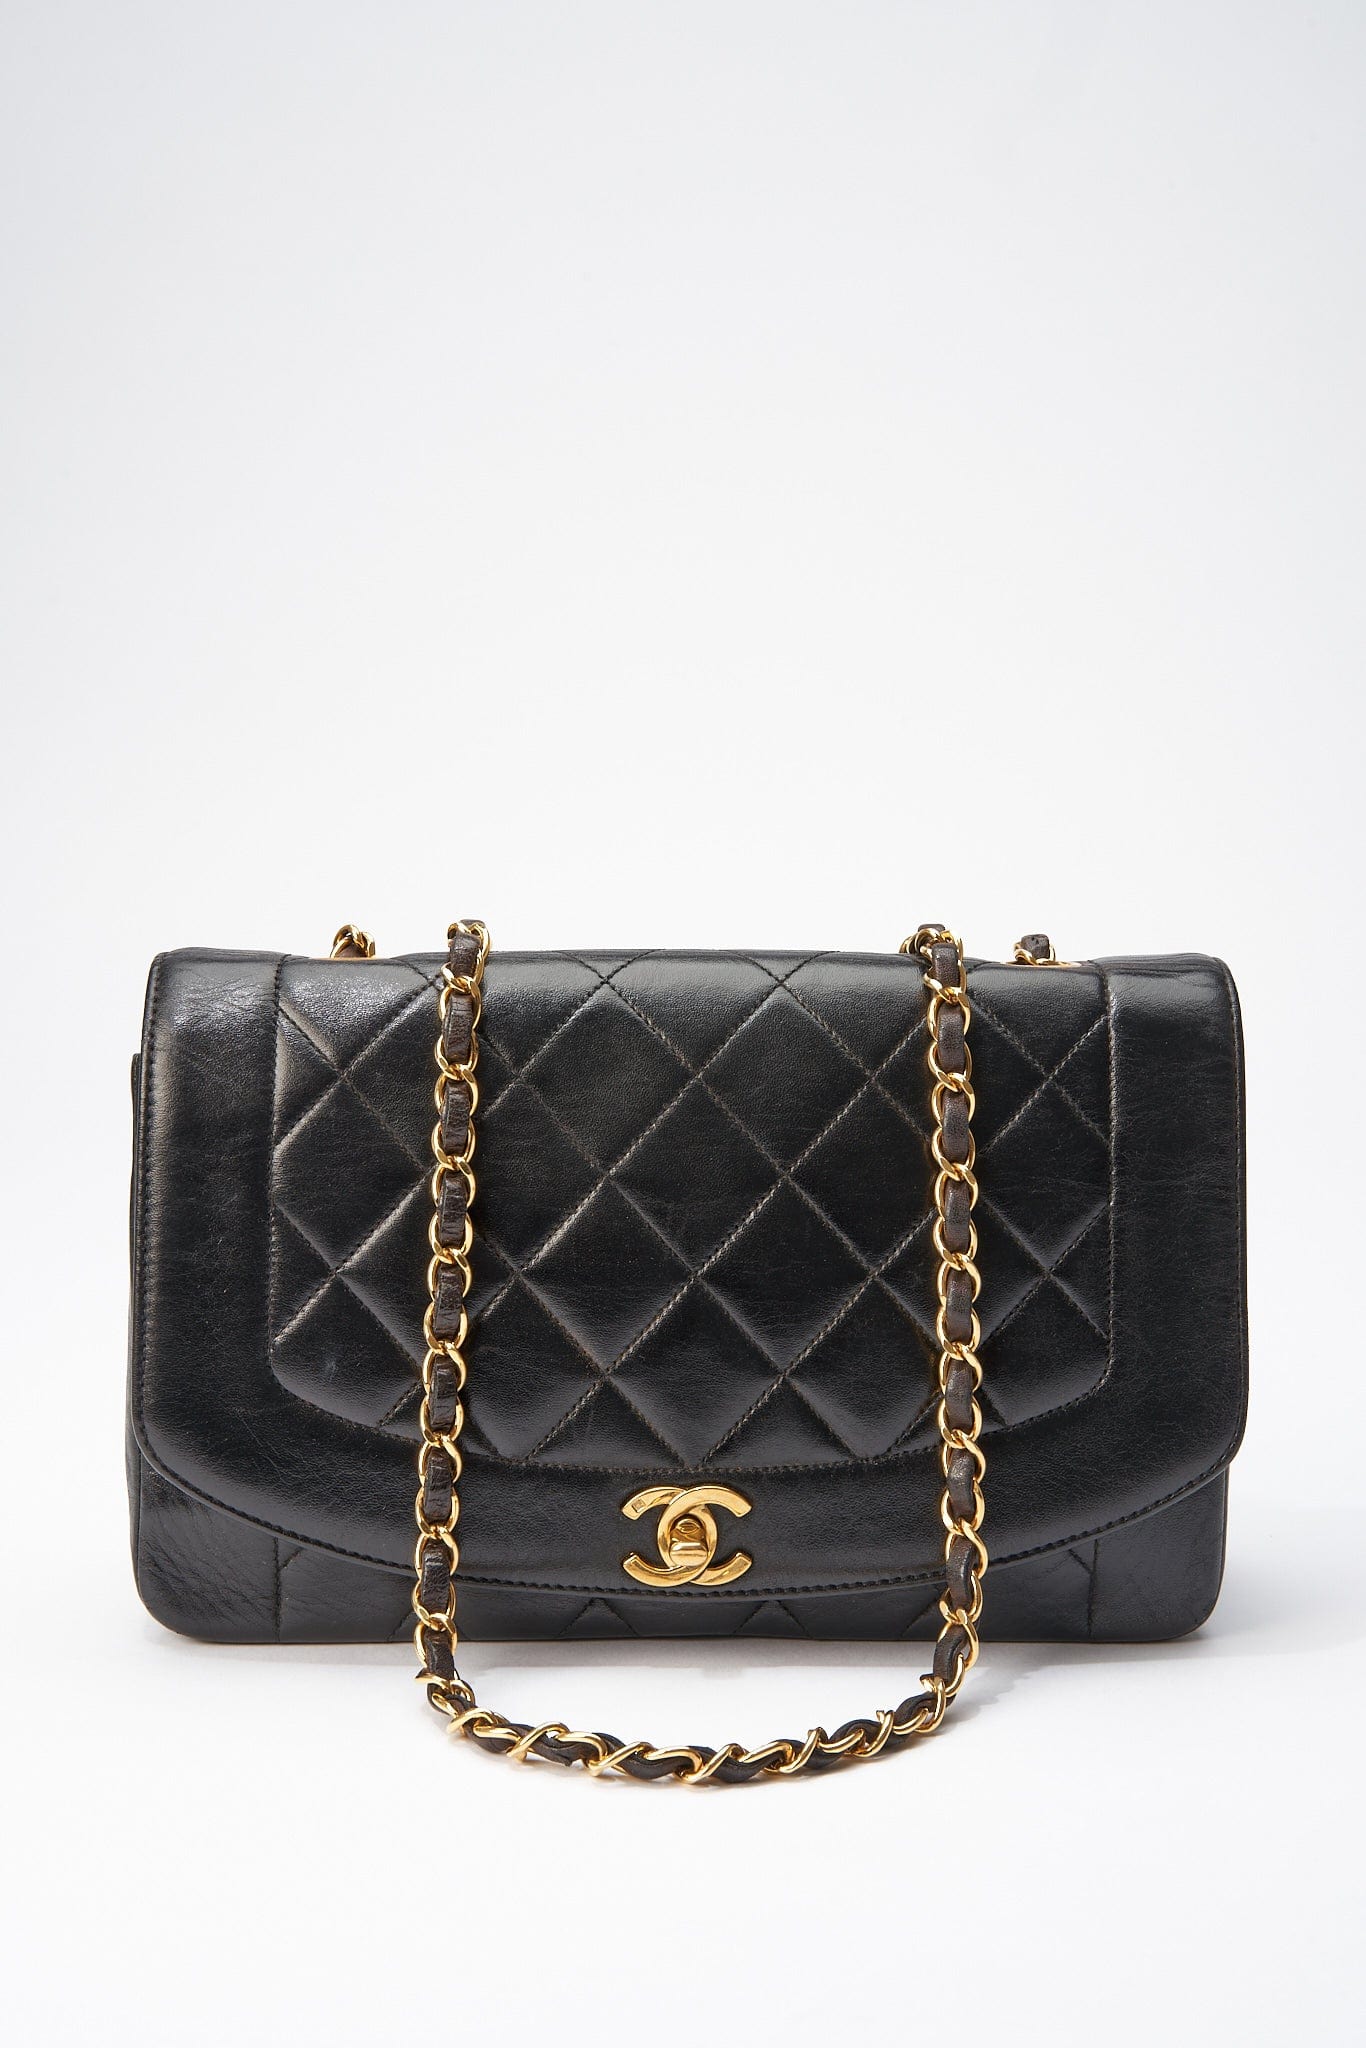 Chanel Diana Bags - 26 For Sale on 1stDibs